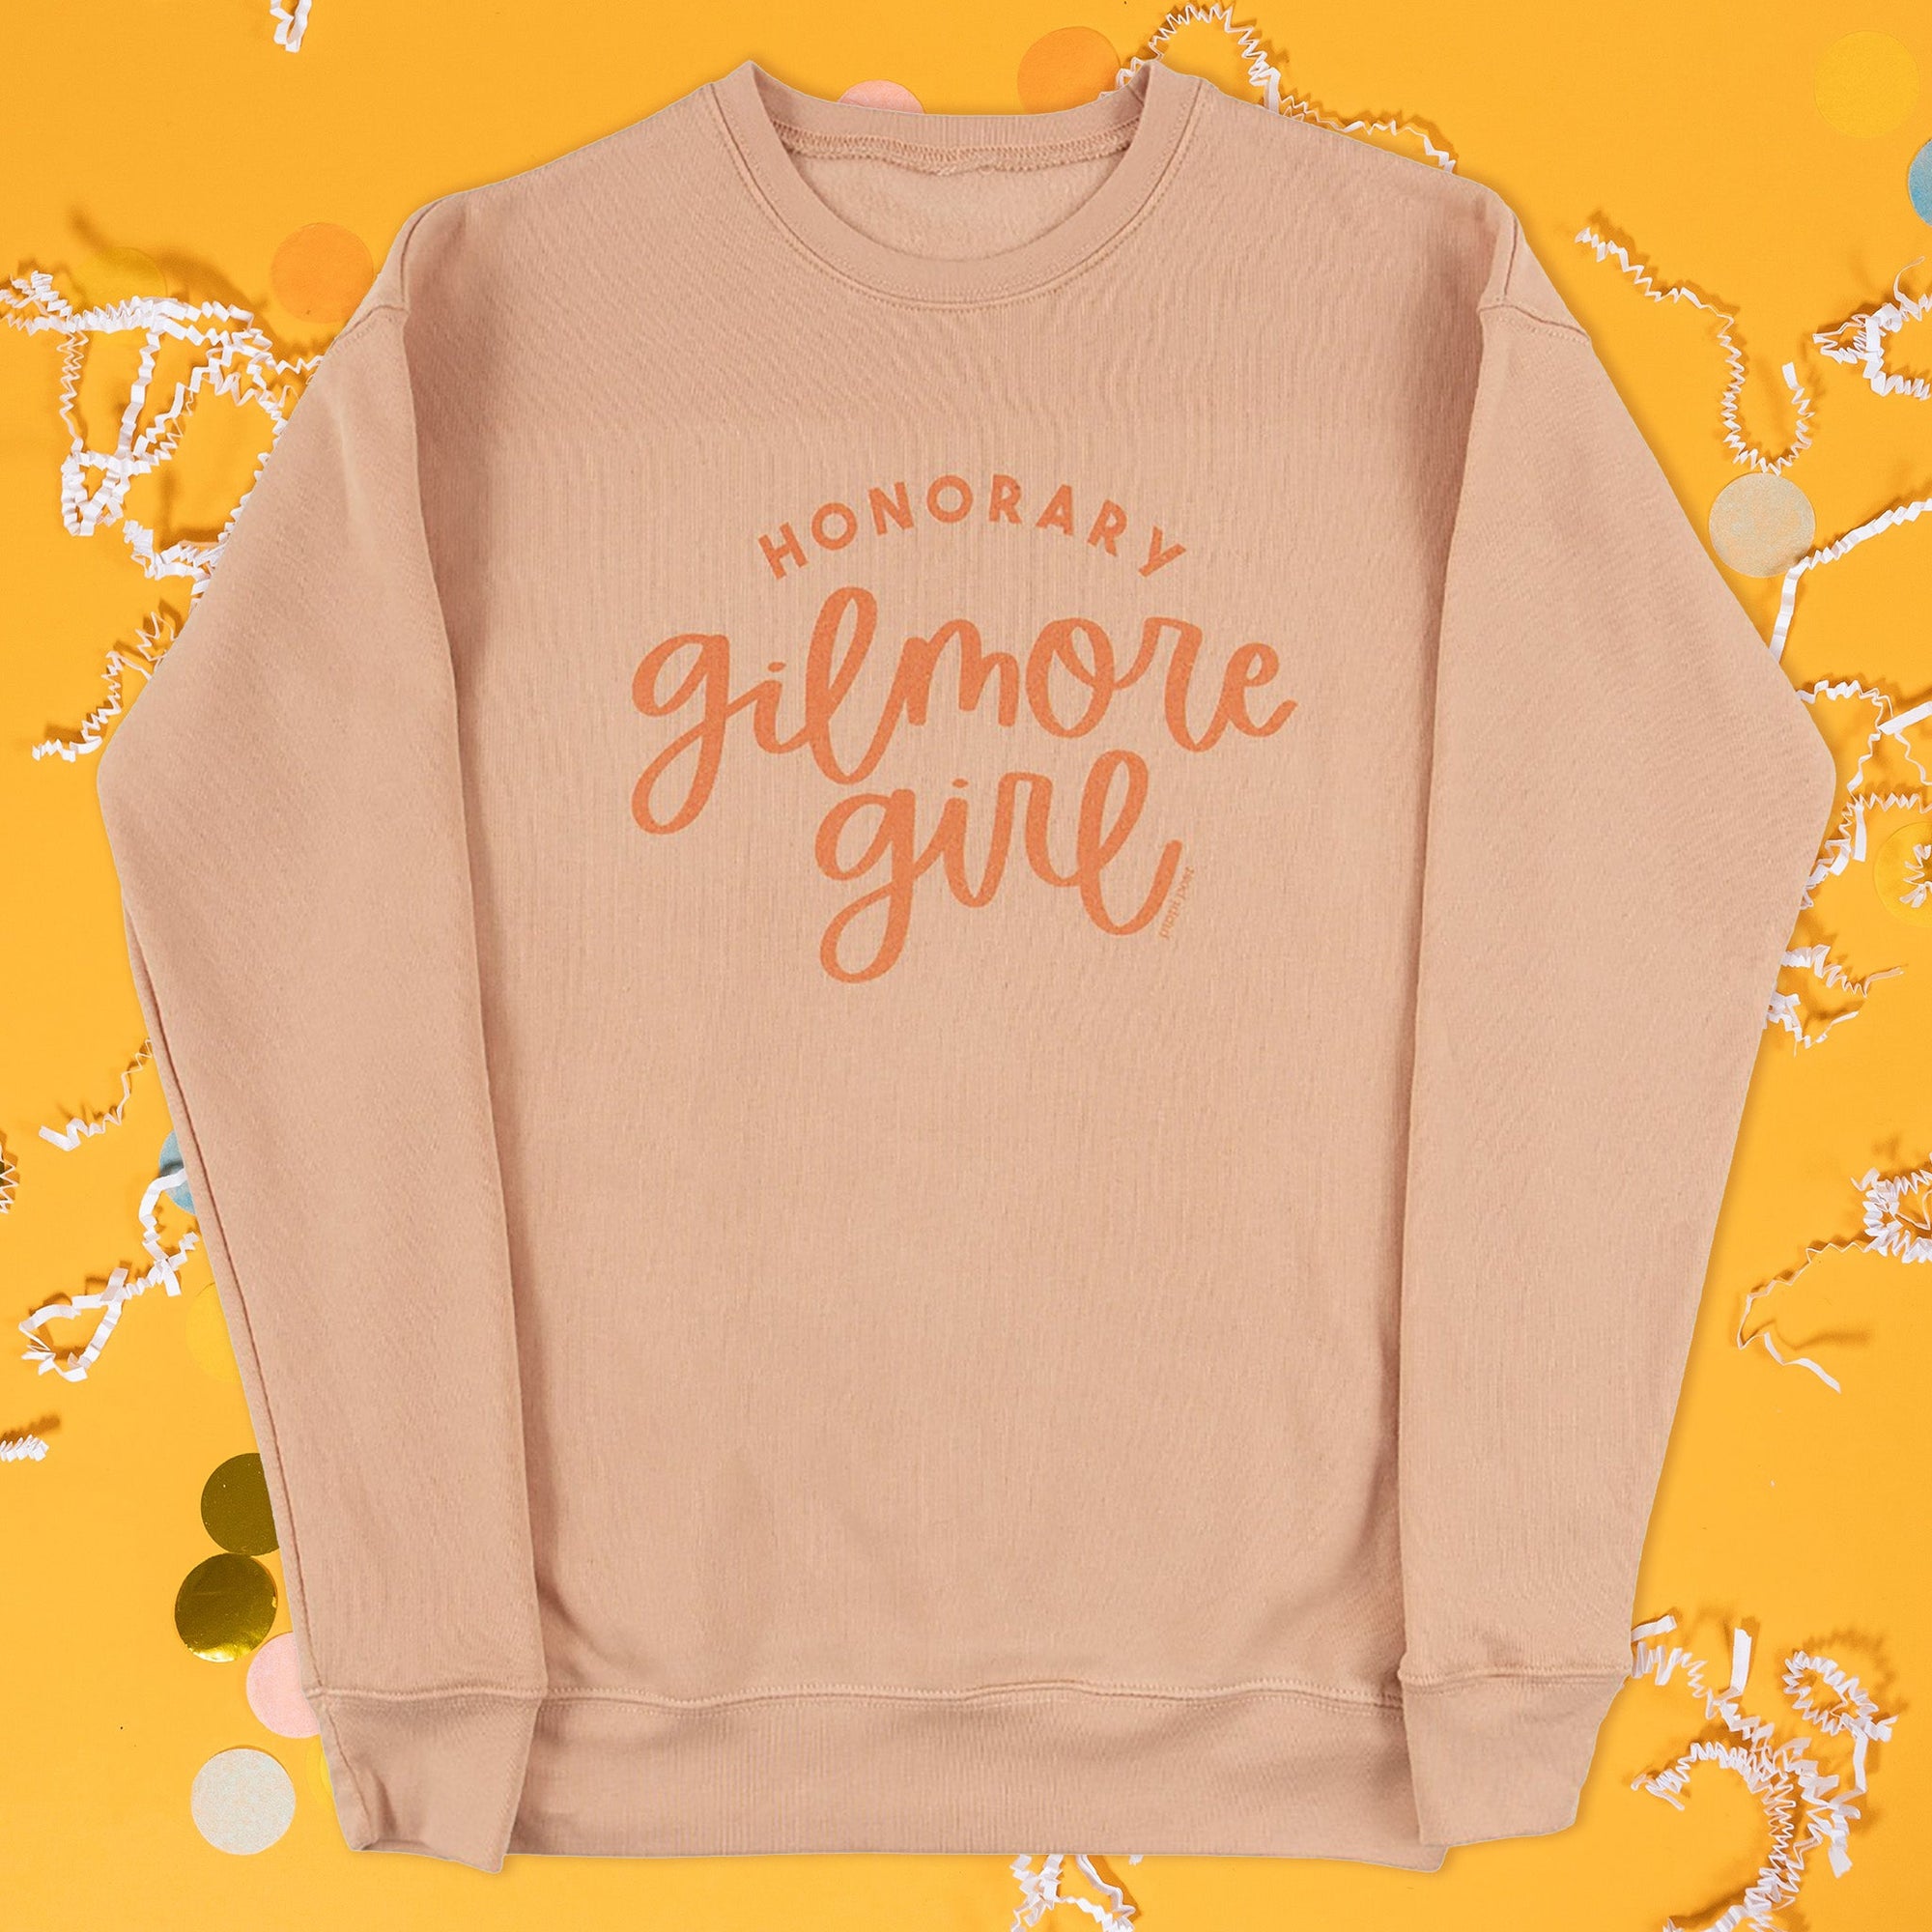 On a sunny mustard background lays a sweatshirt with white crinkle and big, colorful confetti scattered around. The sweatshirt is a pretty peach color that says "Honorary Gilmore Girl" in orange. The word "Honorary" is in an all caps, sans serif font and the words "Gilmore Girls" is in a hand drawn script font.